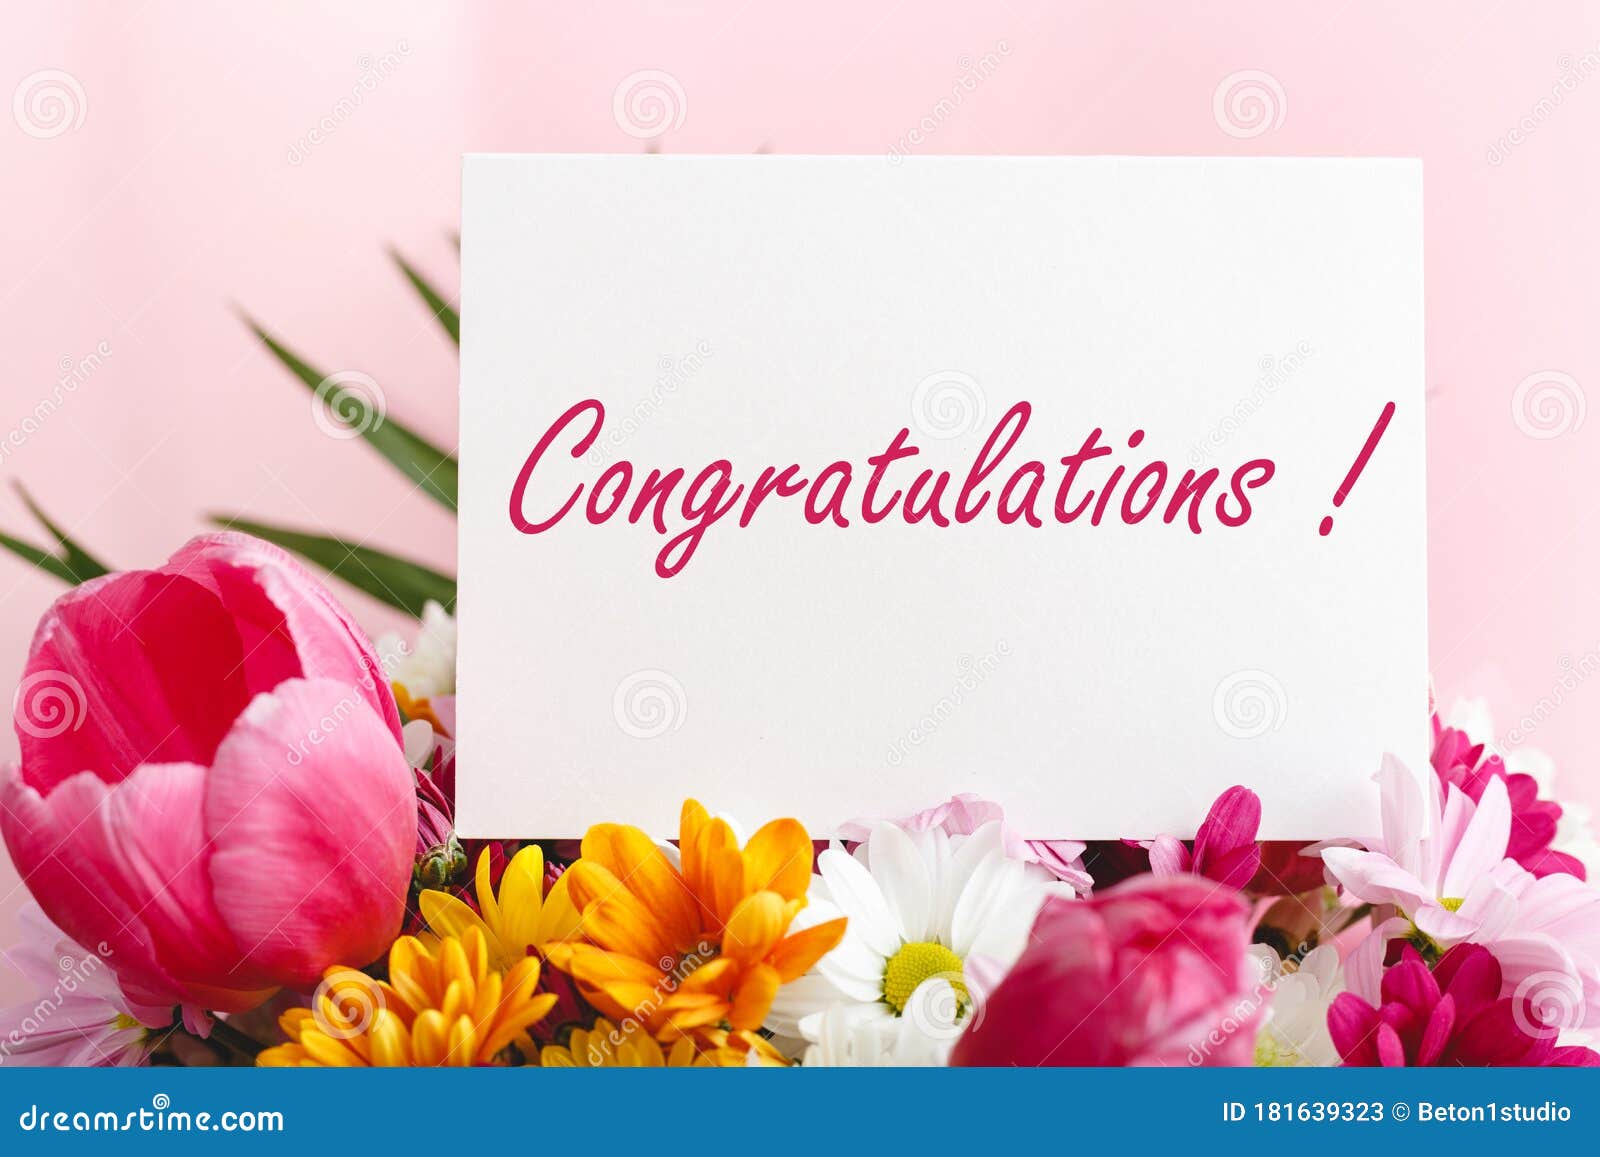 Congratulations Text on Gift Card in Flowers Bouquet on Pink ...